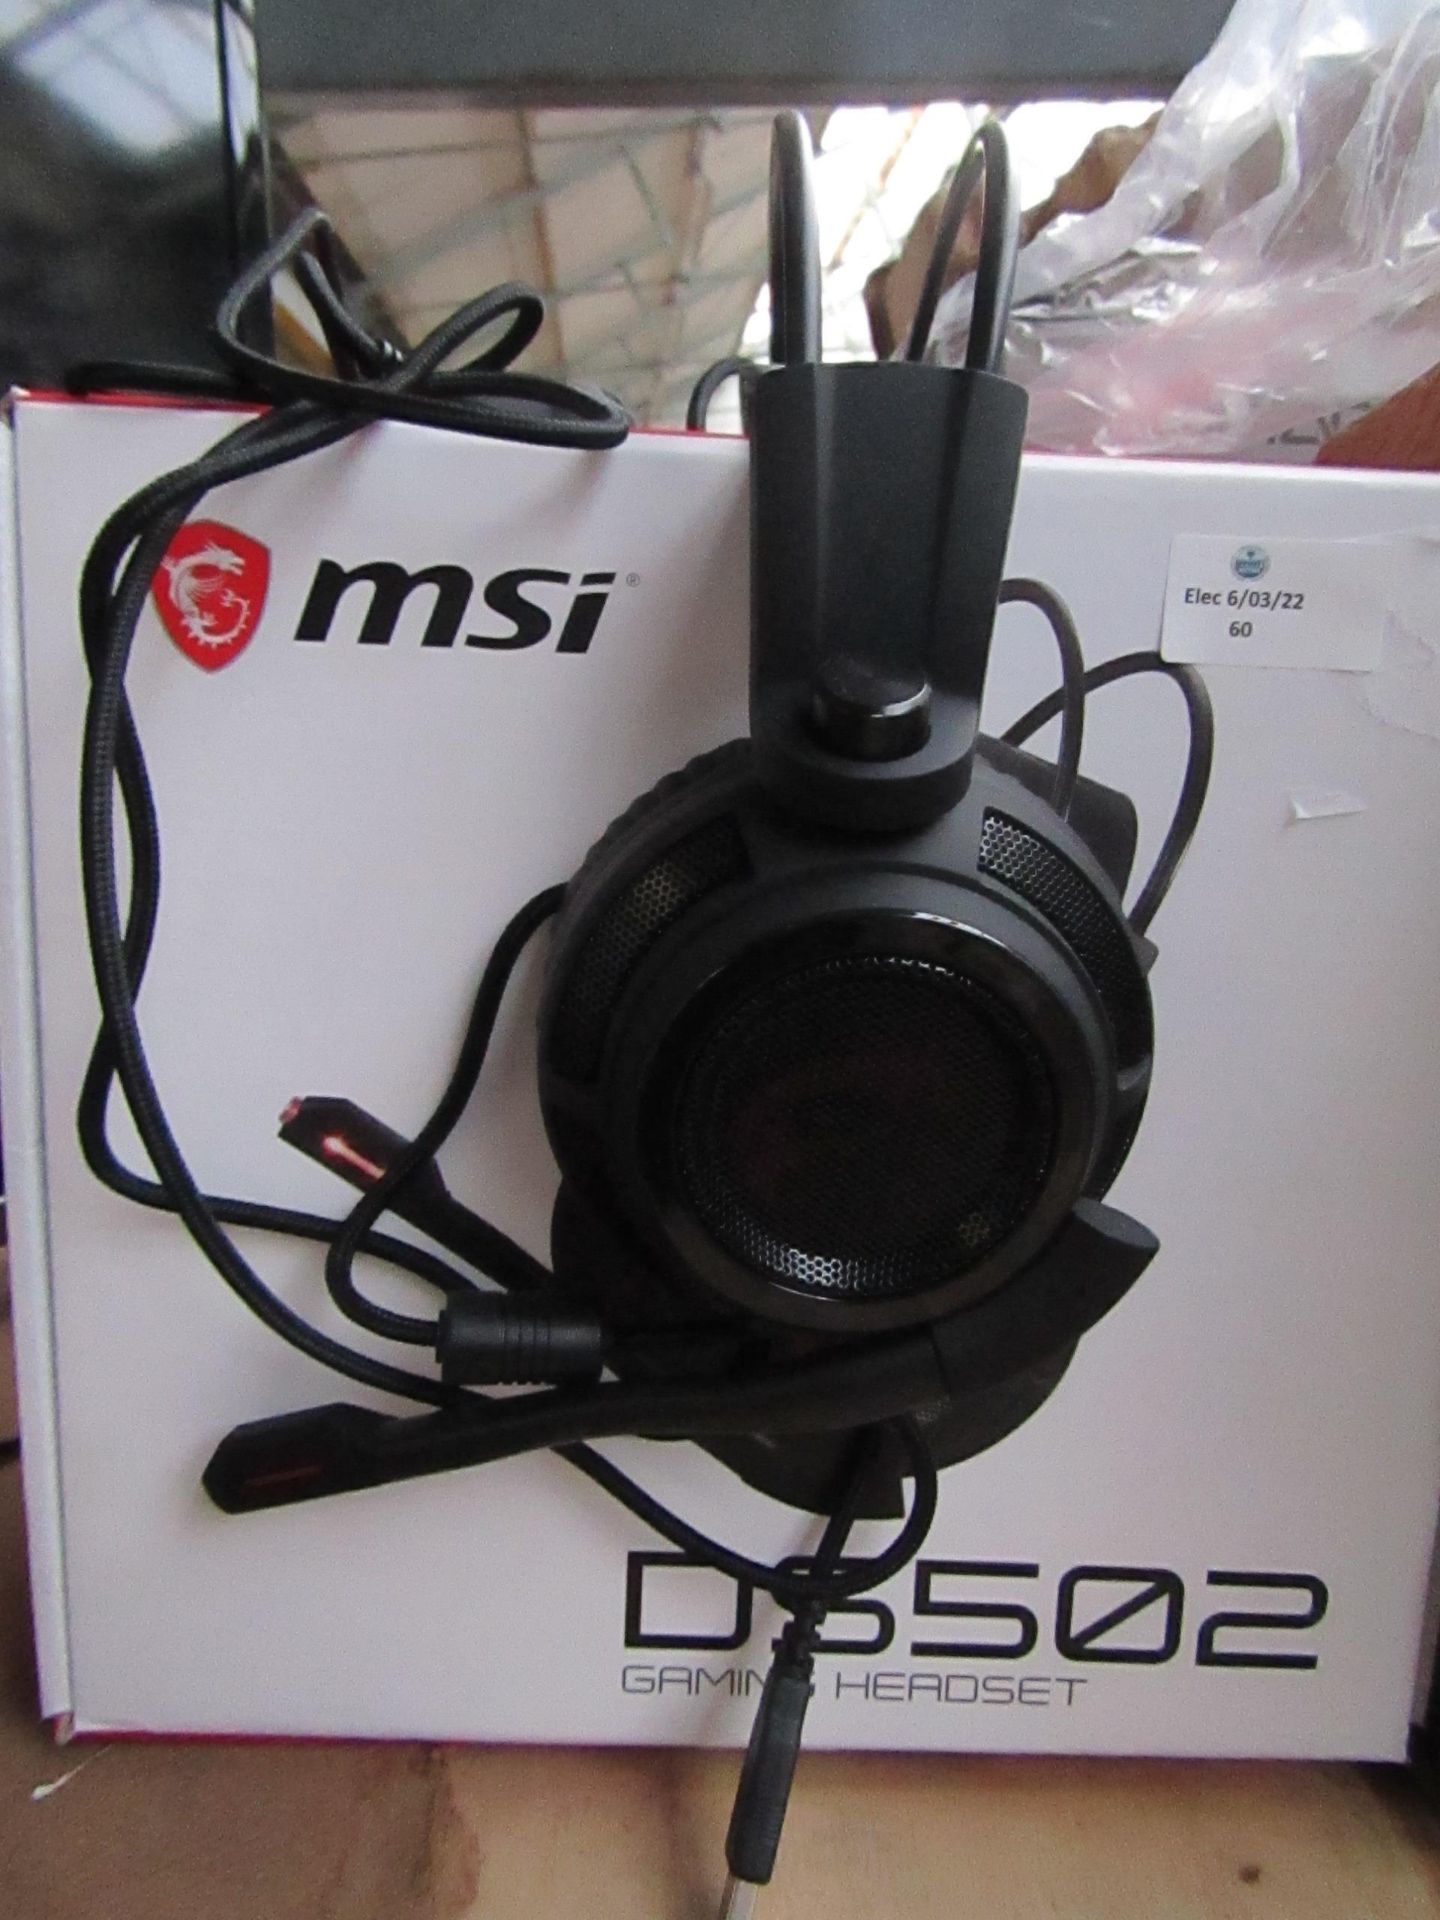 1x MSI DS502 PC Gaming Headset, tested working for sound monly via a laptop, comes in original Box - Image 2 of 2